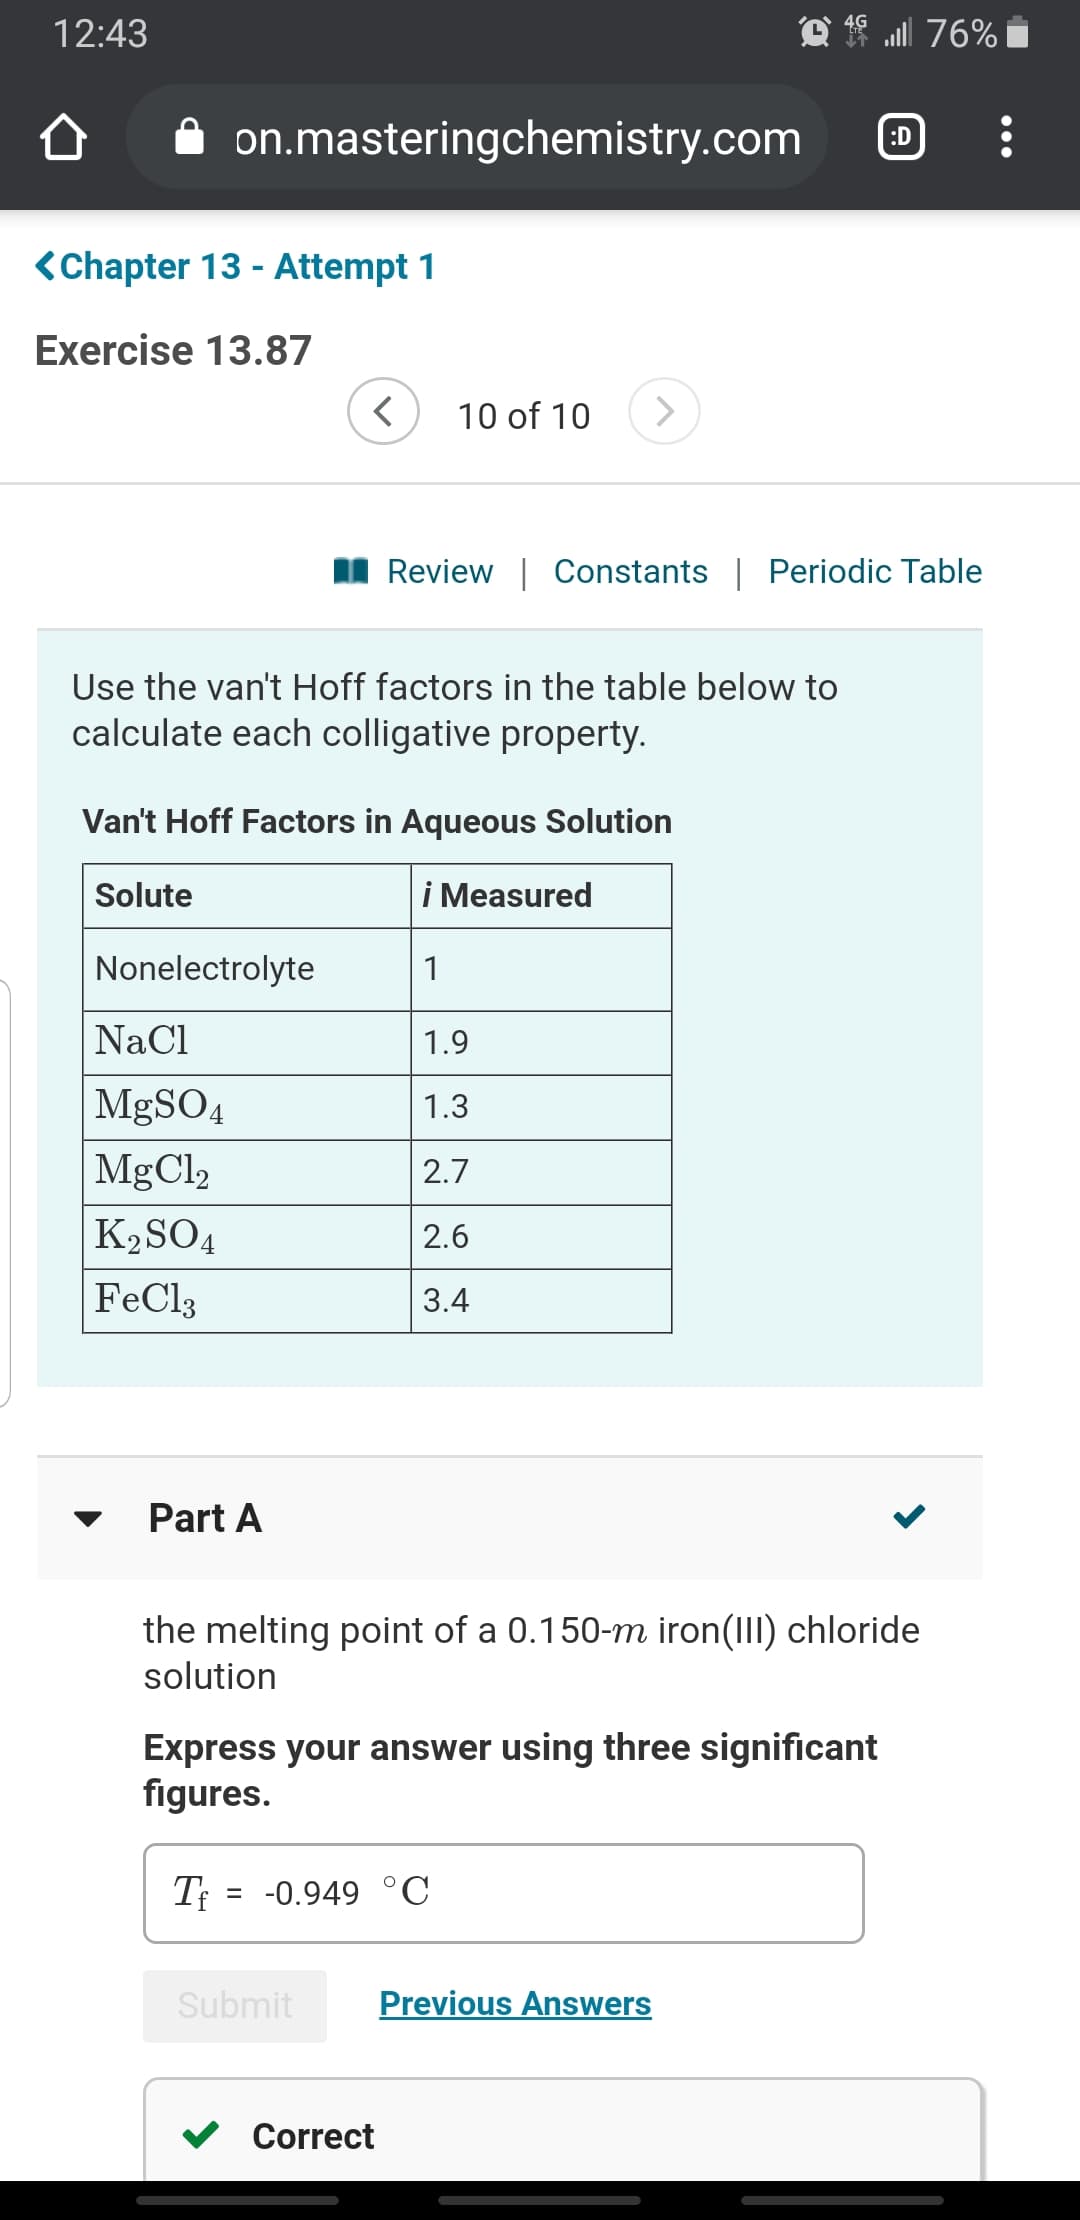 f ull 76%
12:43
on.masteringchemistry.com
:D
<Chapter 13 - Attempt 1
Exercise 13.87
<>
10 of 10
I Review | Constants | Periodic Table
Use the van't Hoff factors in the table below to
calculate each colligative property.
Van't Hoff Factors in Aqueous Solution
i Measured
Solute
Nonelectrolyte
NaCl
1.9
MgSO4
1.3
MgCl,
2.7
K2SO4
2.6
FeCl3
3.4
Part A
the melting point of a 0.150-m iron(III) chloride
solution
Express your answer using three significant
figures.
= -0.949 °C
%3D
Previous Answers
Submit
Correct
